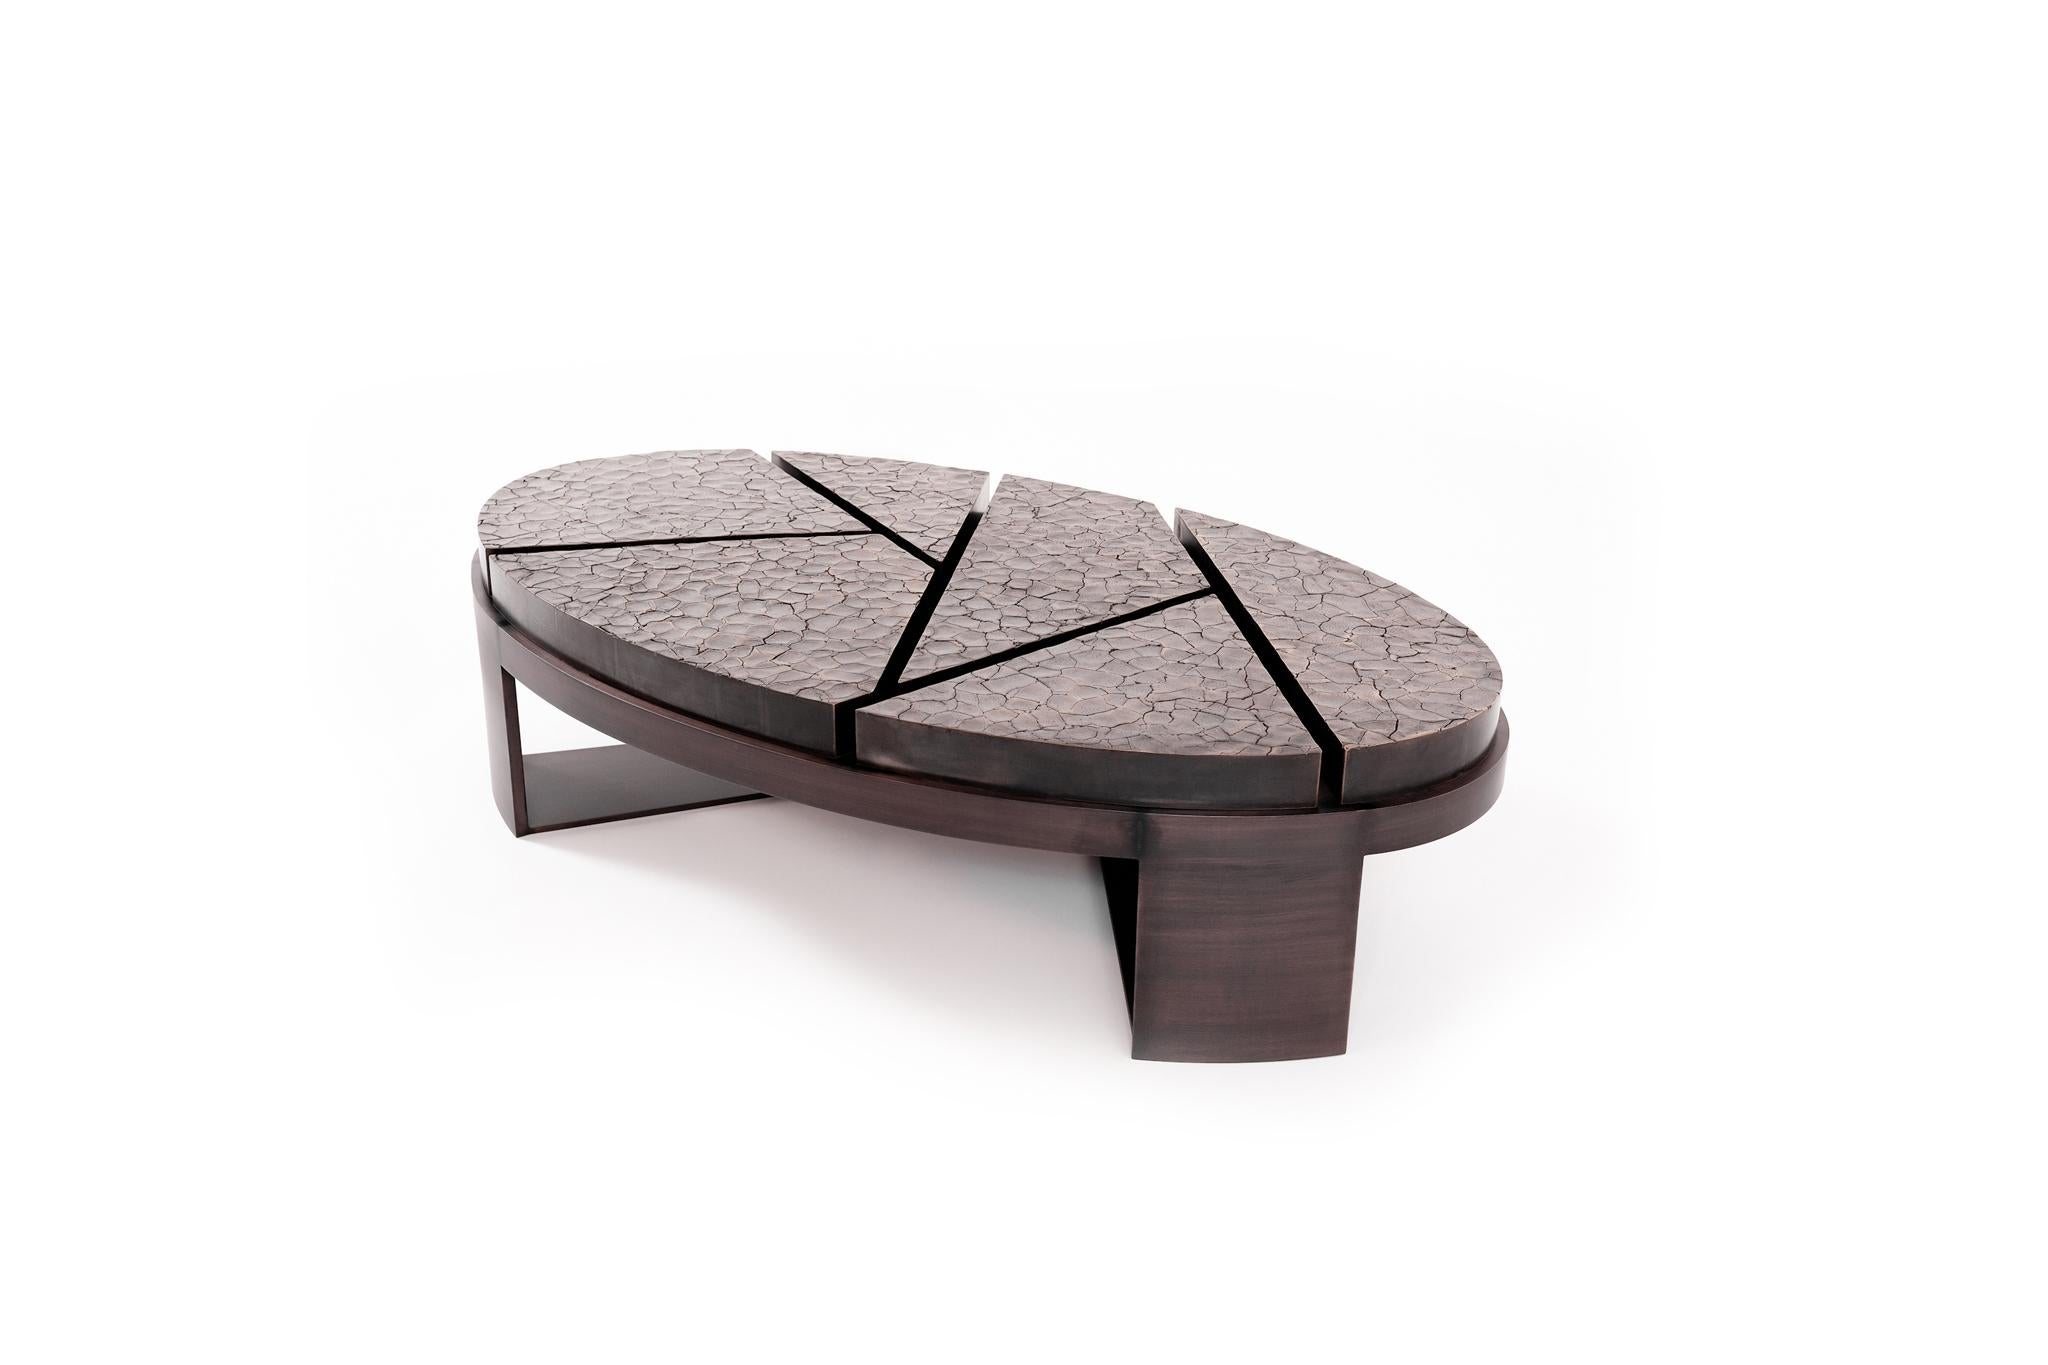 The Aurora coffee table was the very first piece created by FBC London and, therefore, very dear to Fiona's heart.

Its geometric base and laser cut surface immediately grab the eye, whilst the Cracked Earth finish rippling across the top ensures